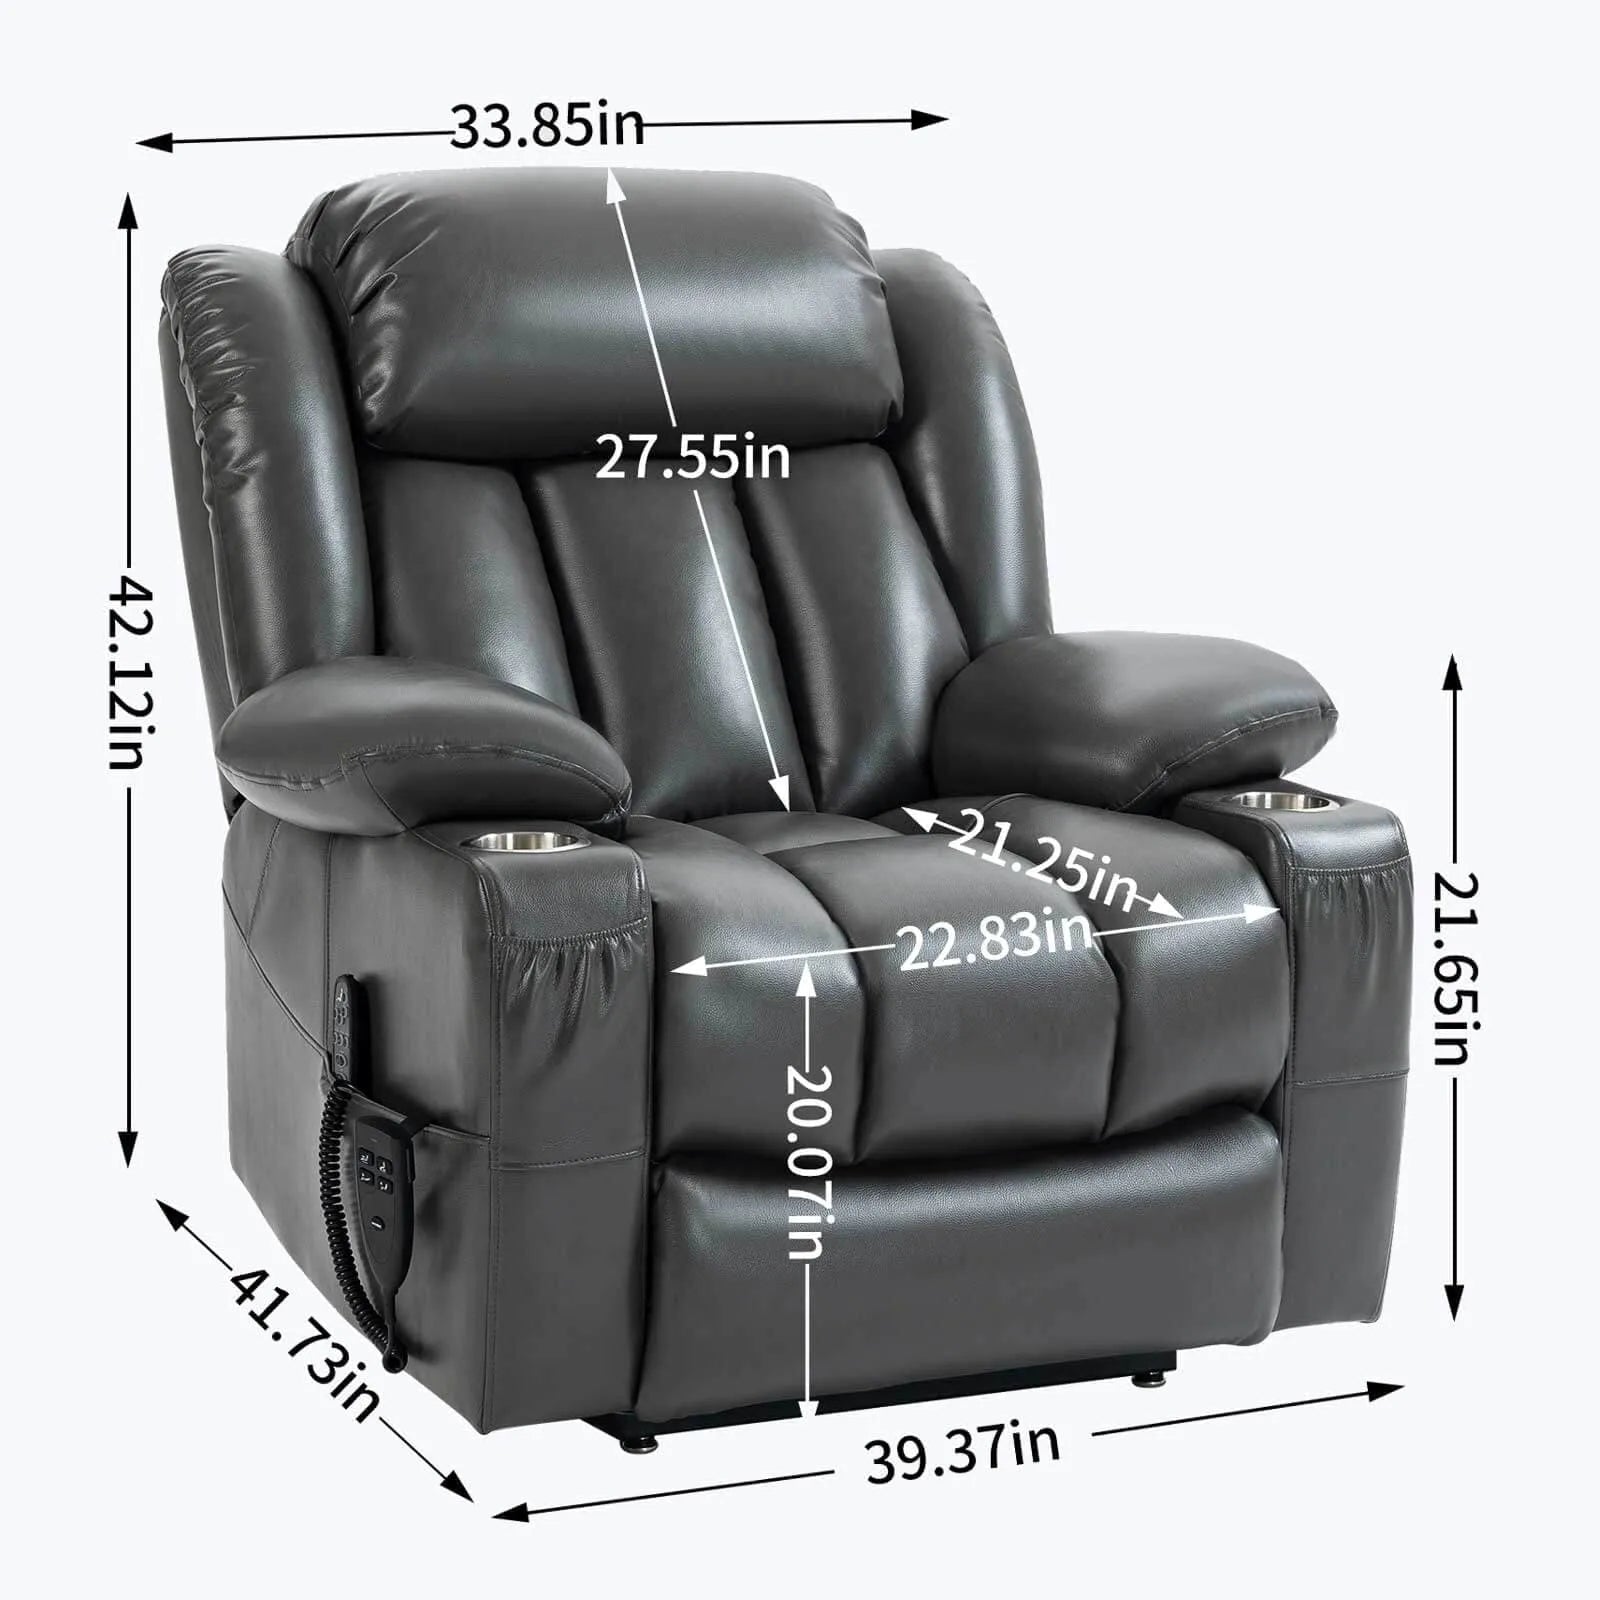 size of lift recliner chair